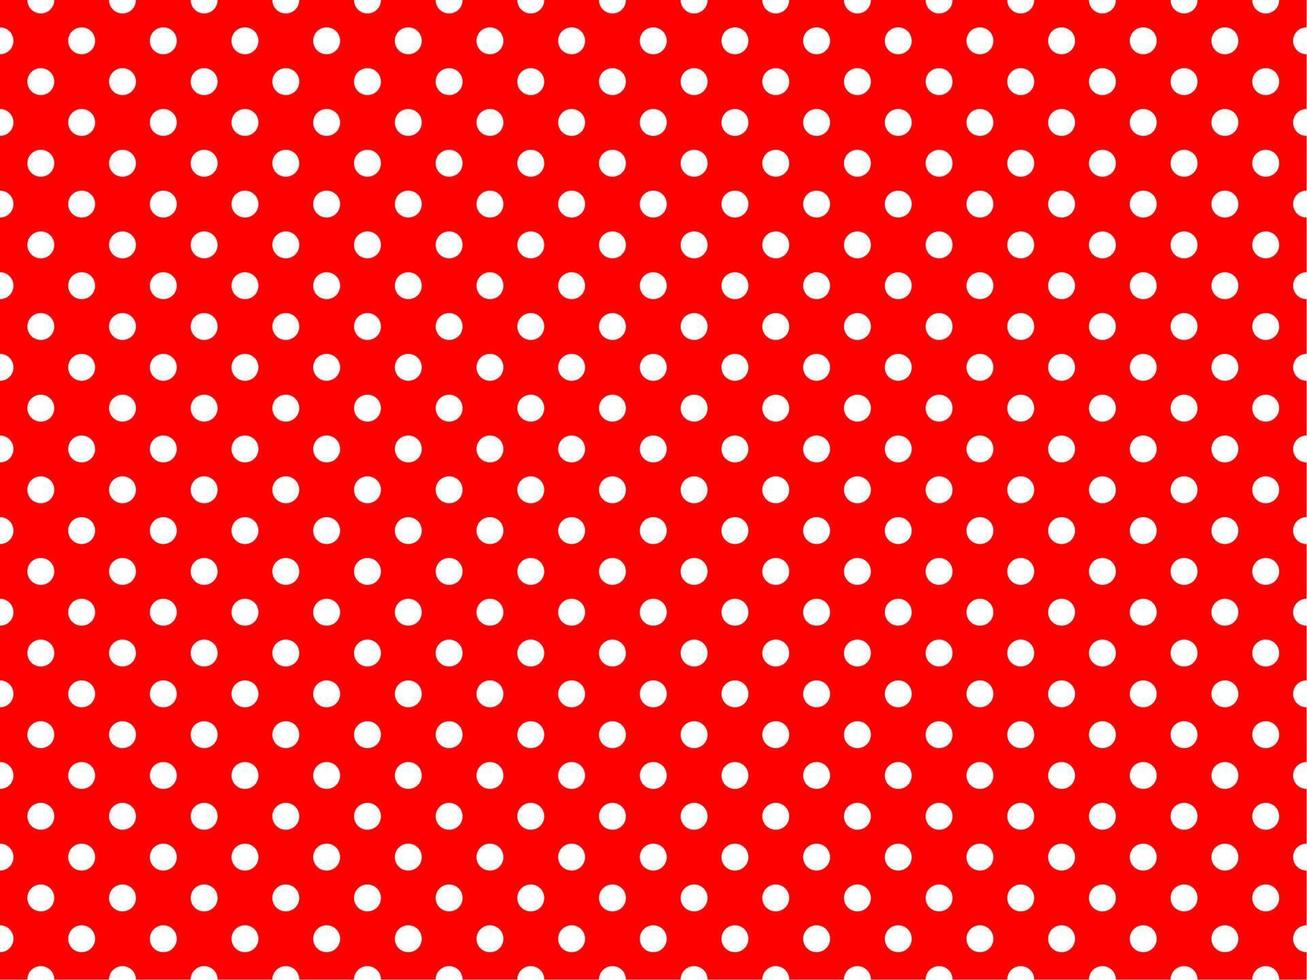 white polka dots over red background vector